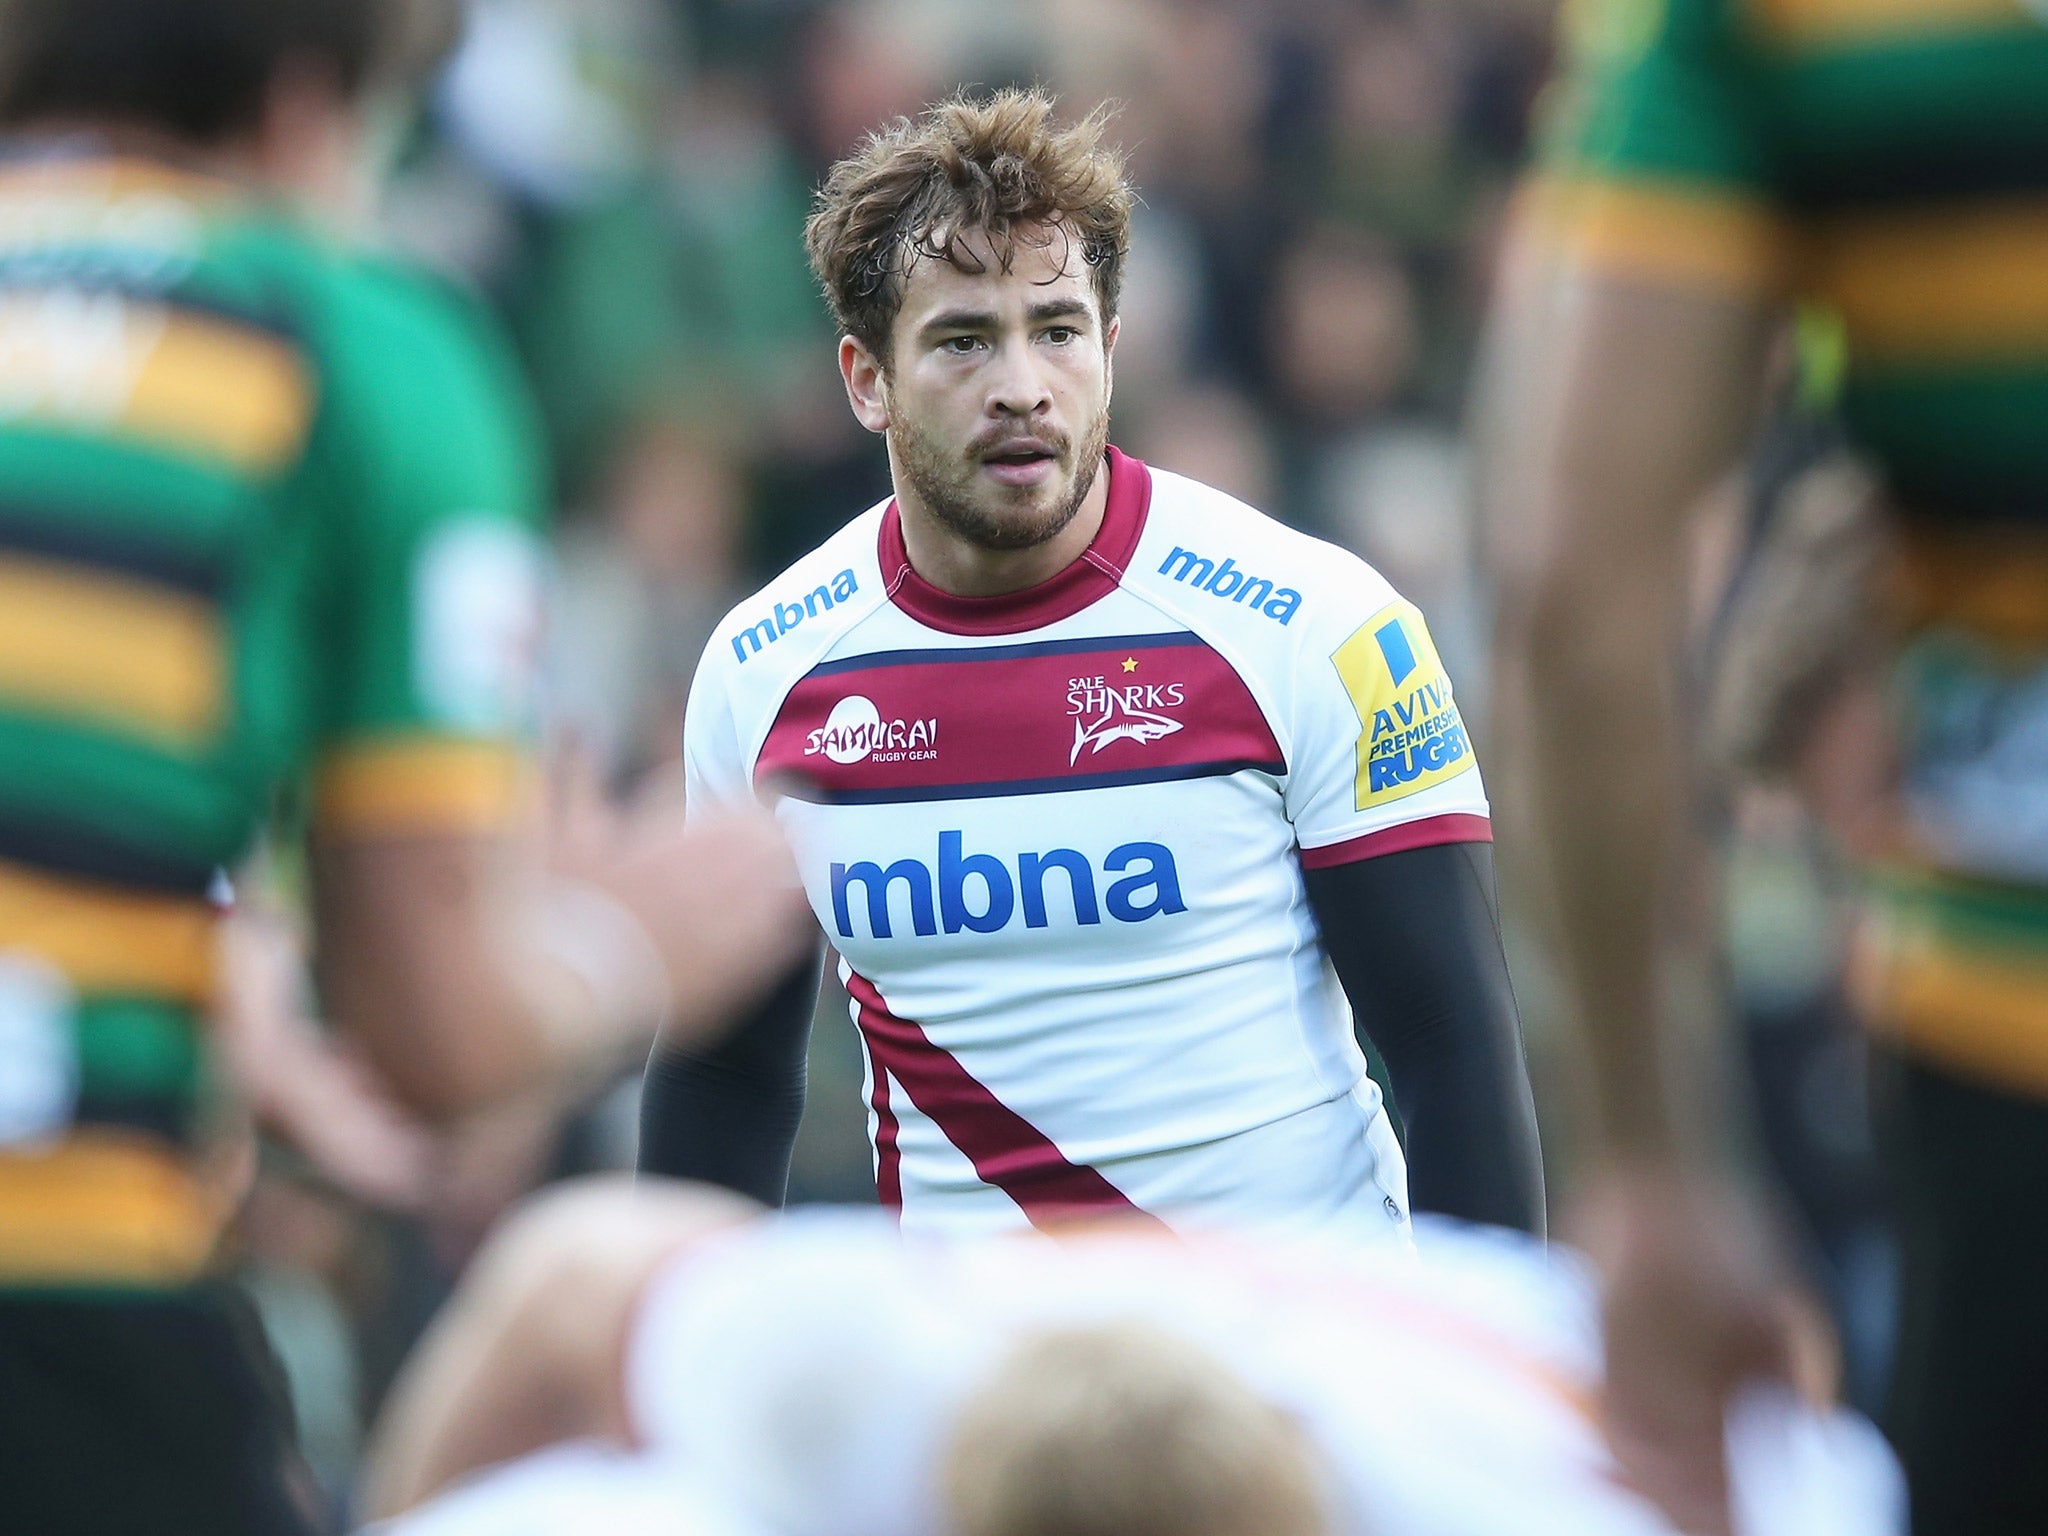 Danny Cipriani made his England debut in 2008 but has only been capped nine times